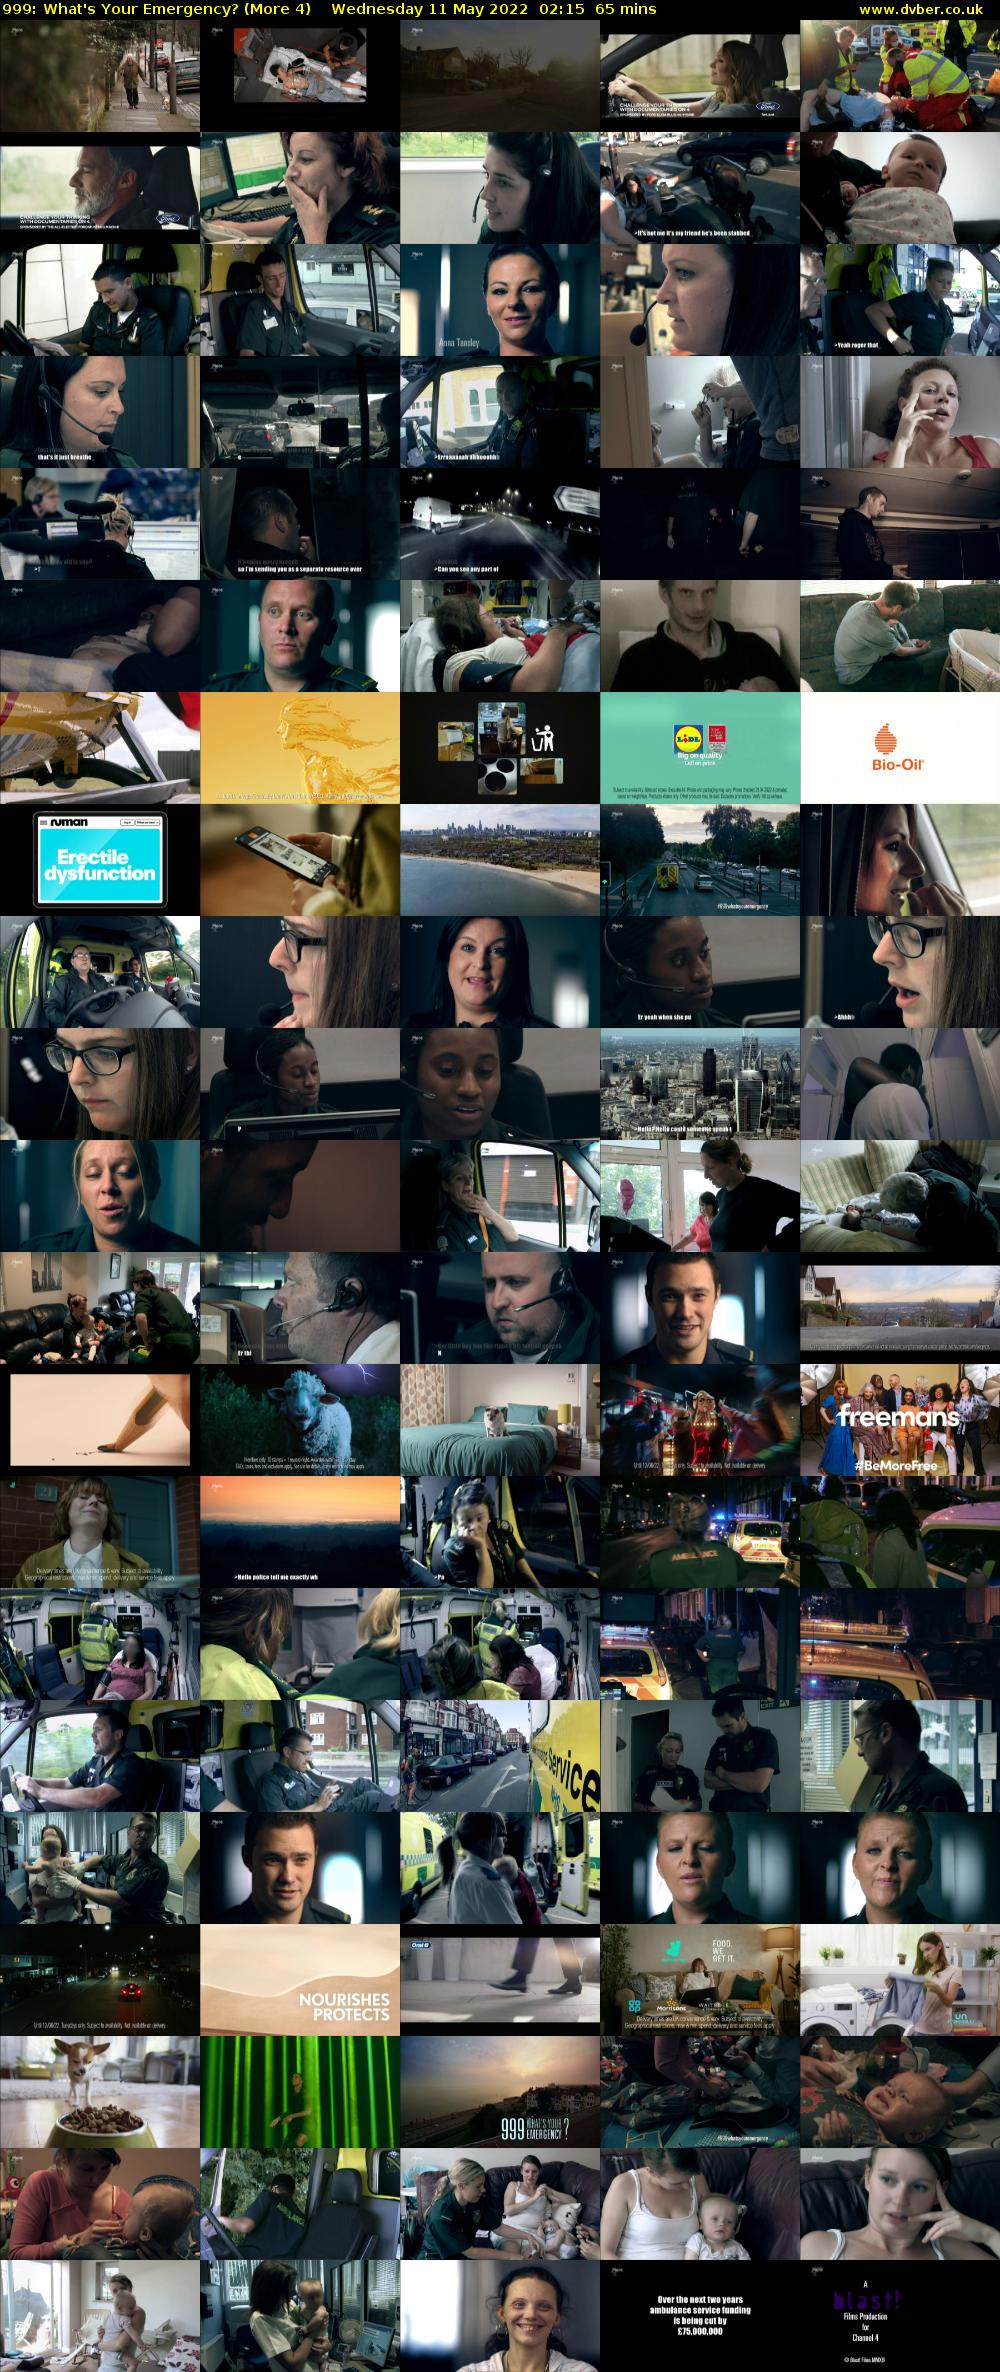 999: What's Your Emergency? (More 4) Wednesday 11 May 2022 02:15 - 03:20